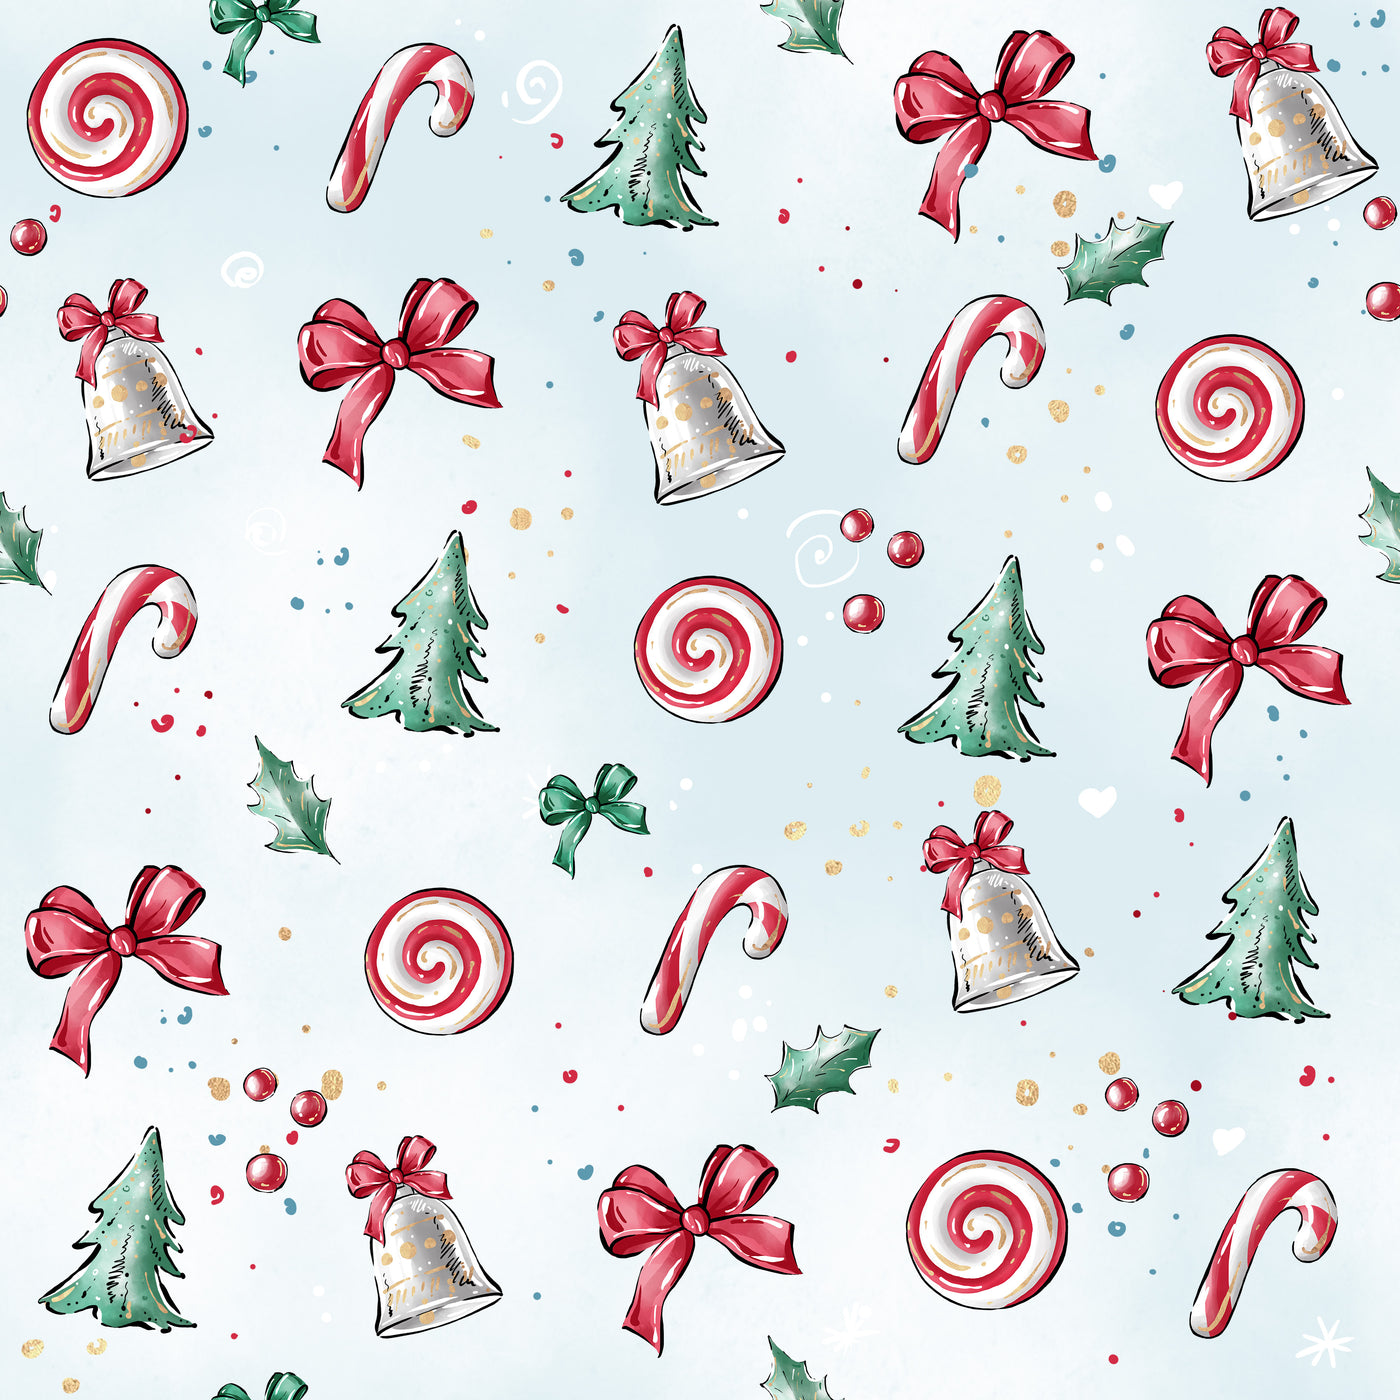 Adhesive Patterned Vinyl - Christmas Gnome 2